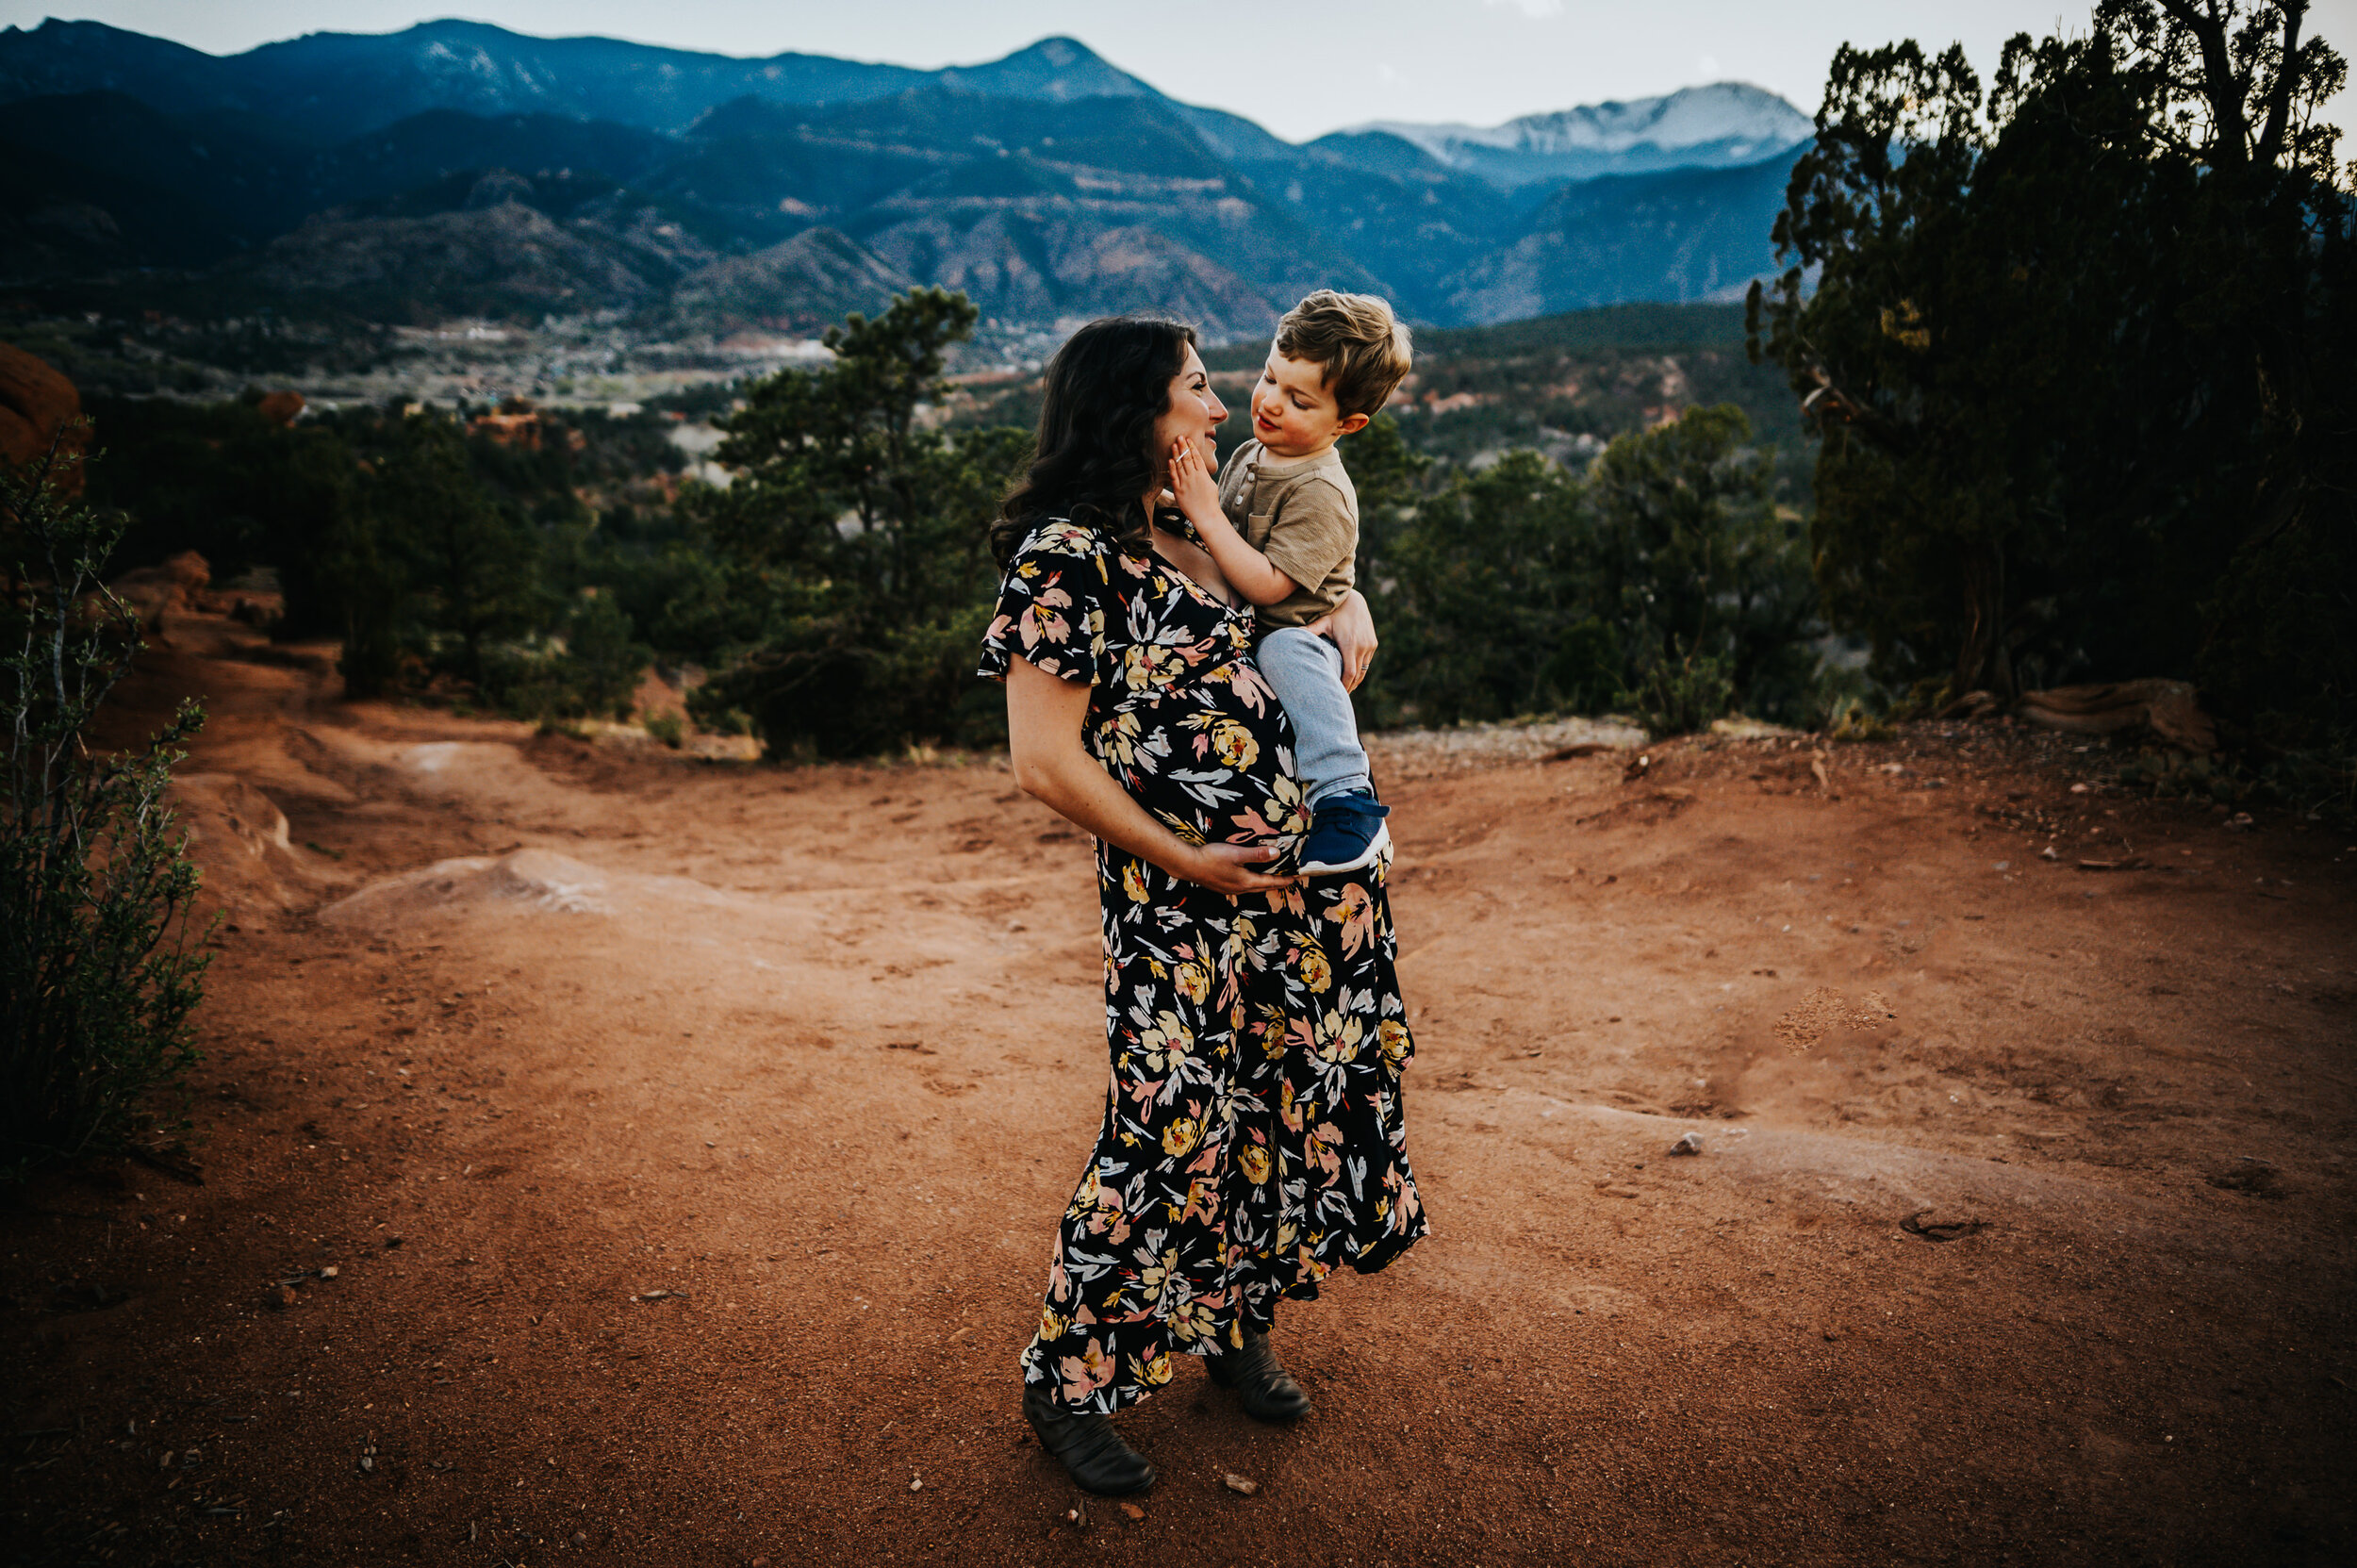 Andrea Grimm Maternity Family Session Colorado Springs Sunset Garden of the Gods Wild Prairie Photography-26-2020.jpg